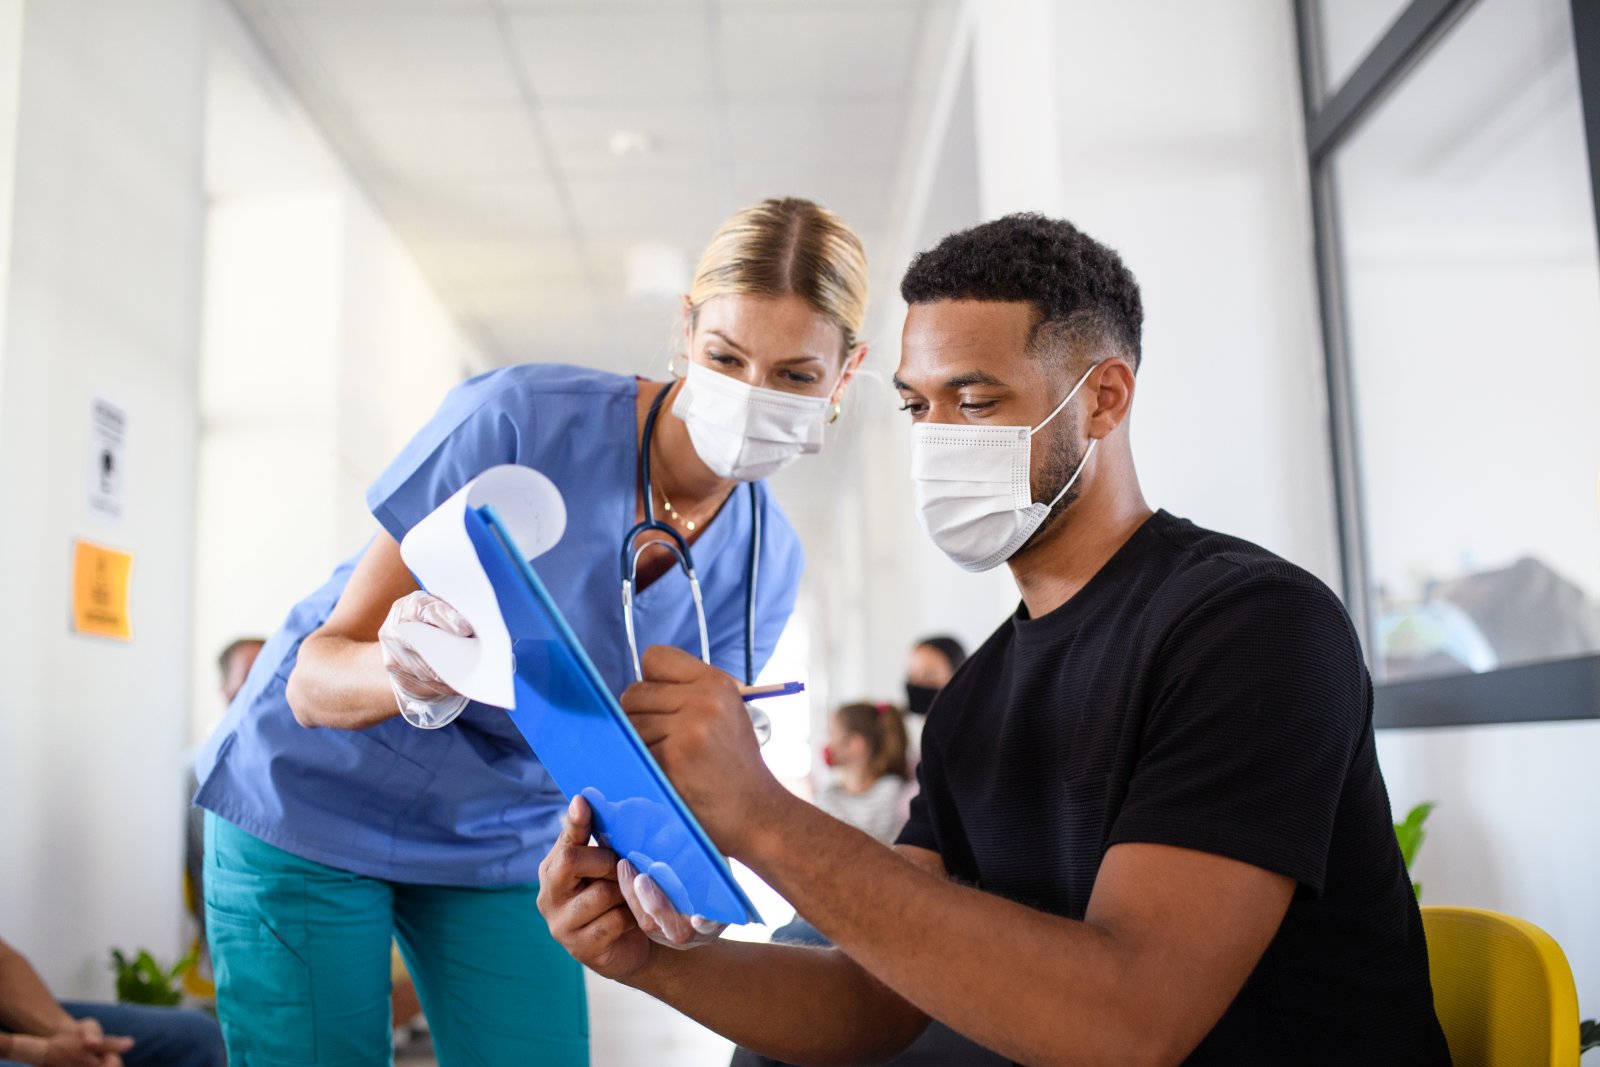 Patient wearing facemask signs consent form for doctor